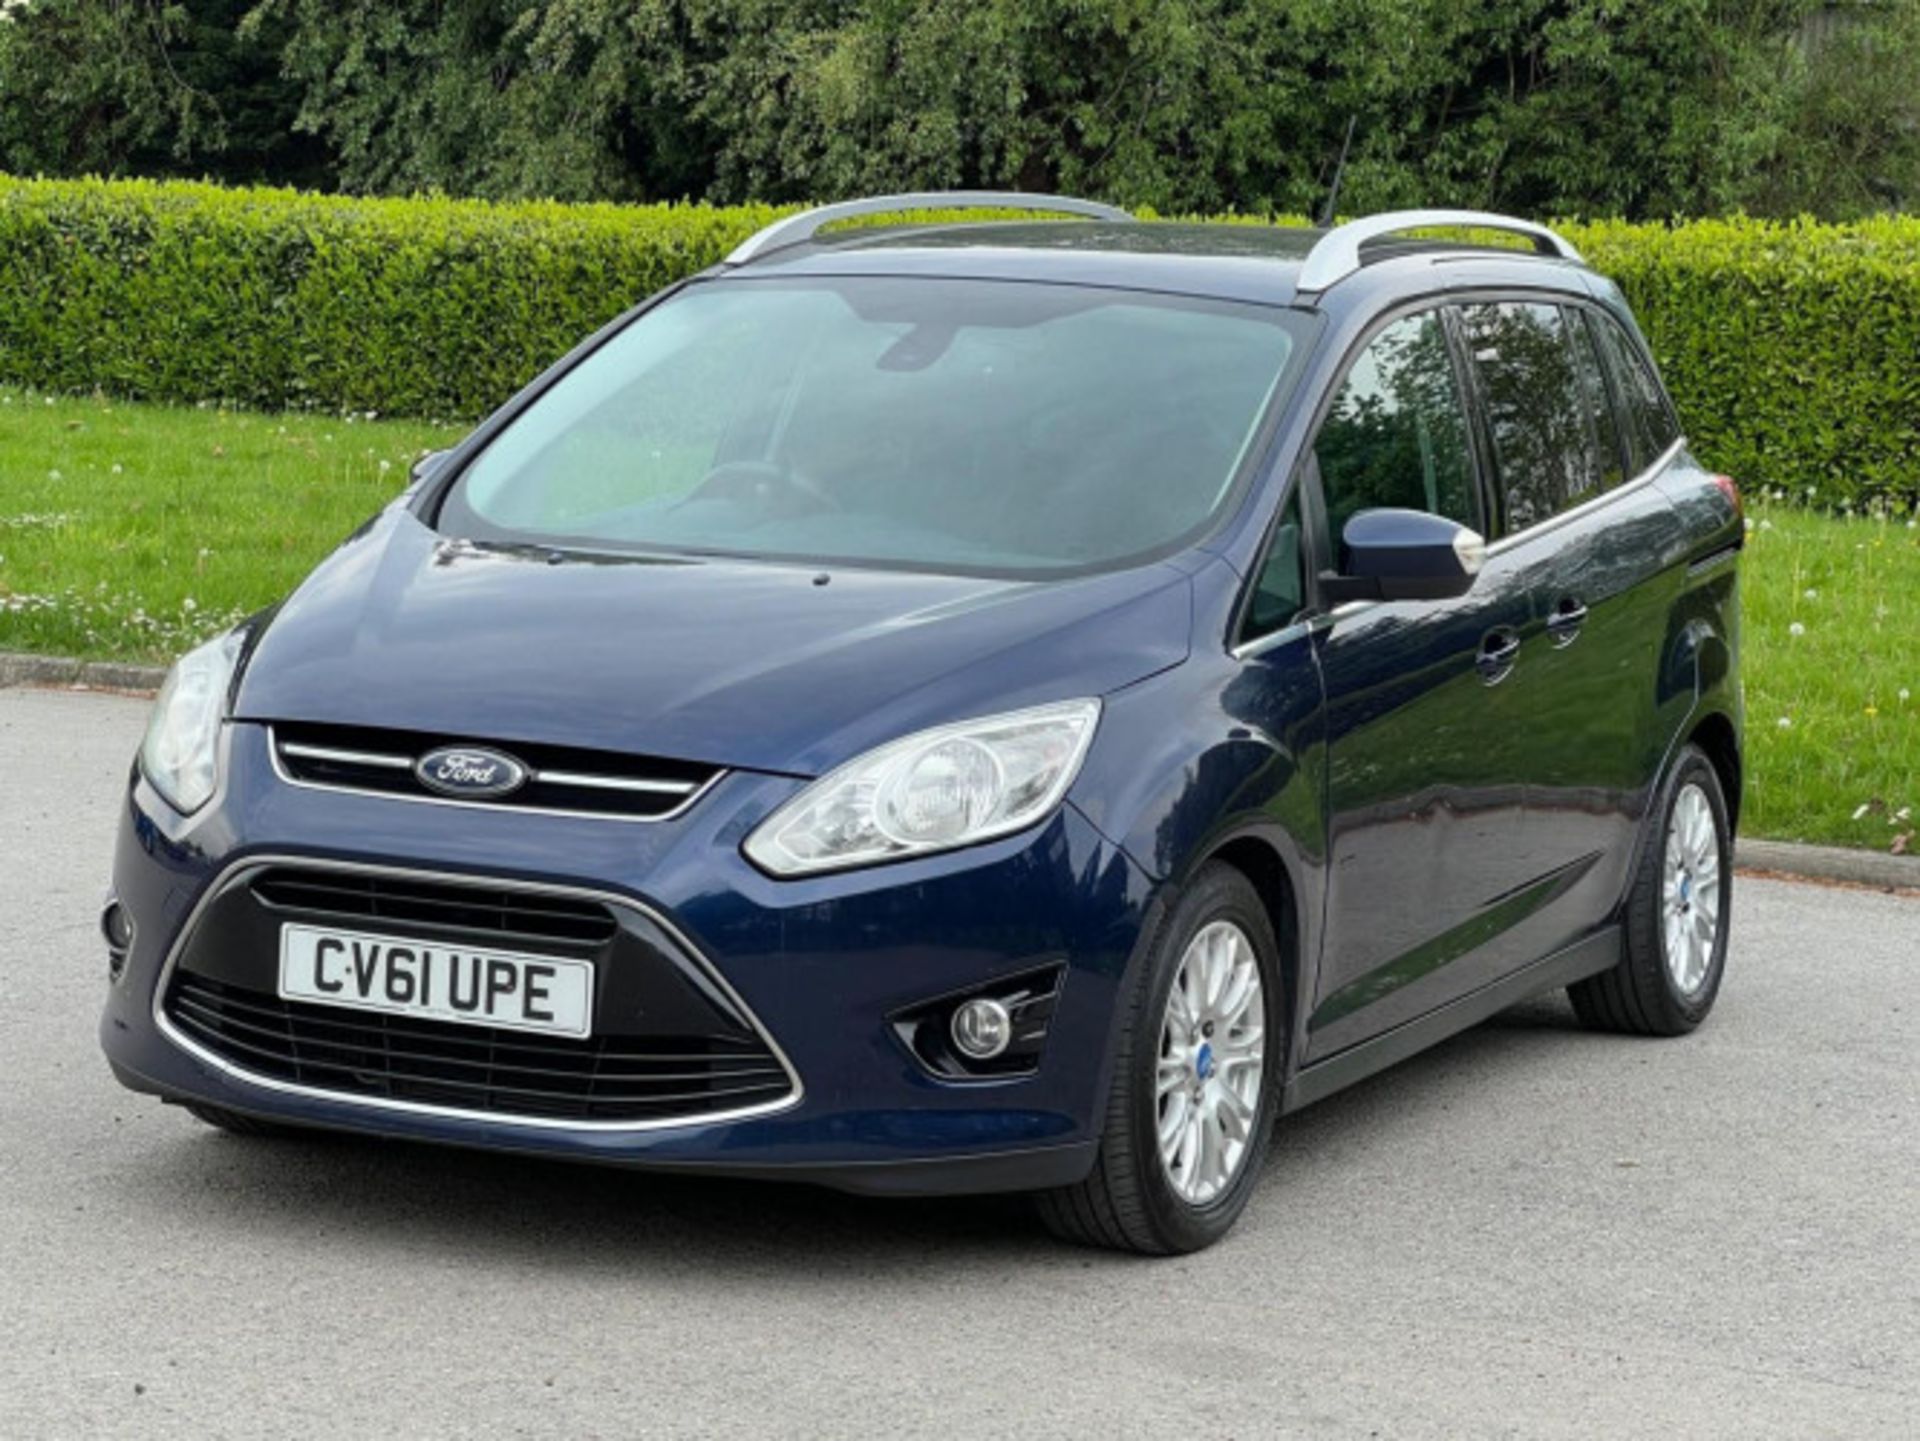 STYLISH AND SPACIOUS 2011 FORD GRAND C-MAX 1.6 TDCI >>--NO VAT ON HAMMER--<< - Image 136 of 136